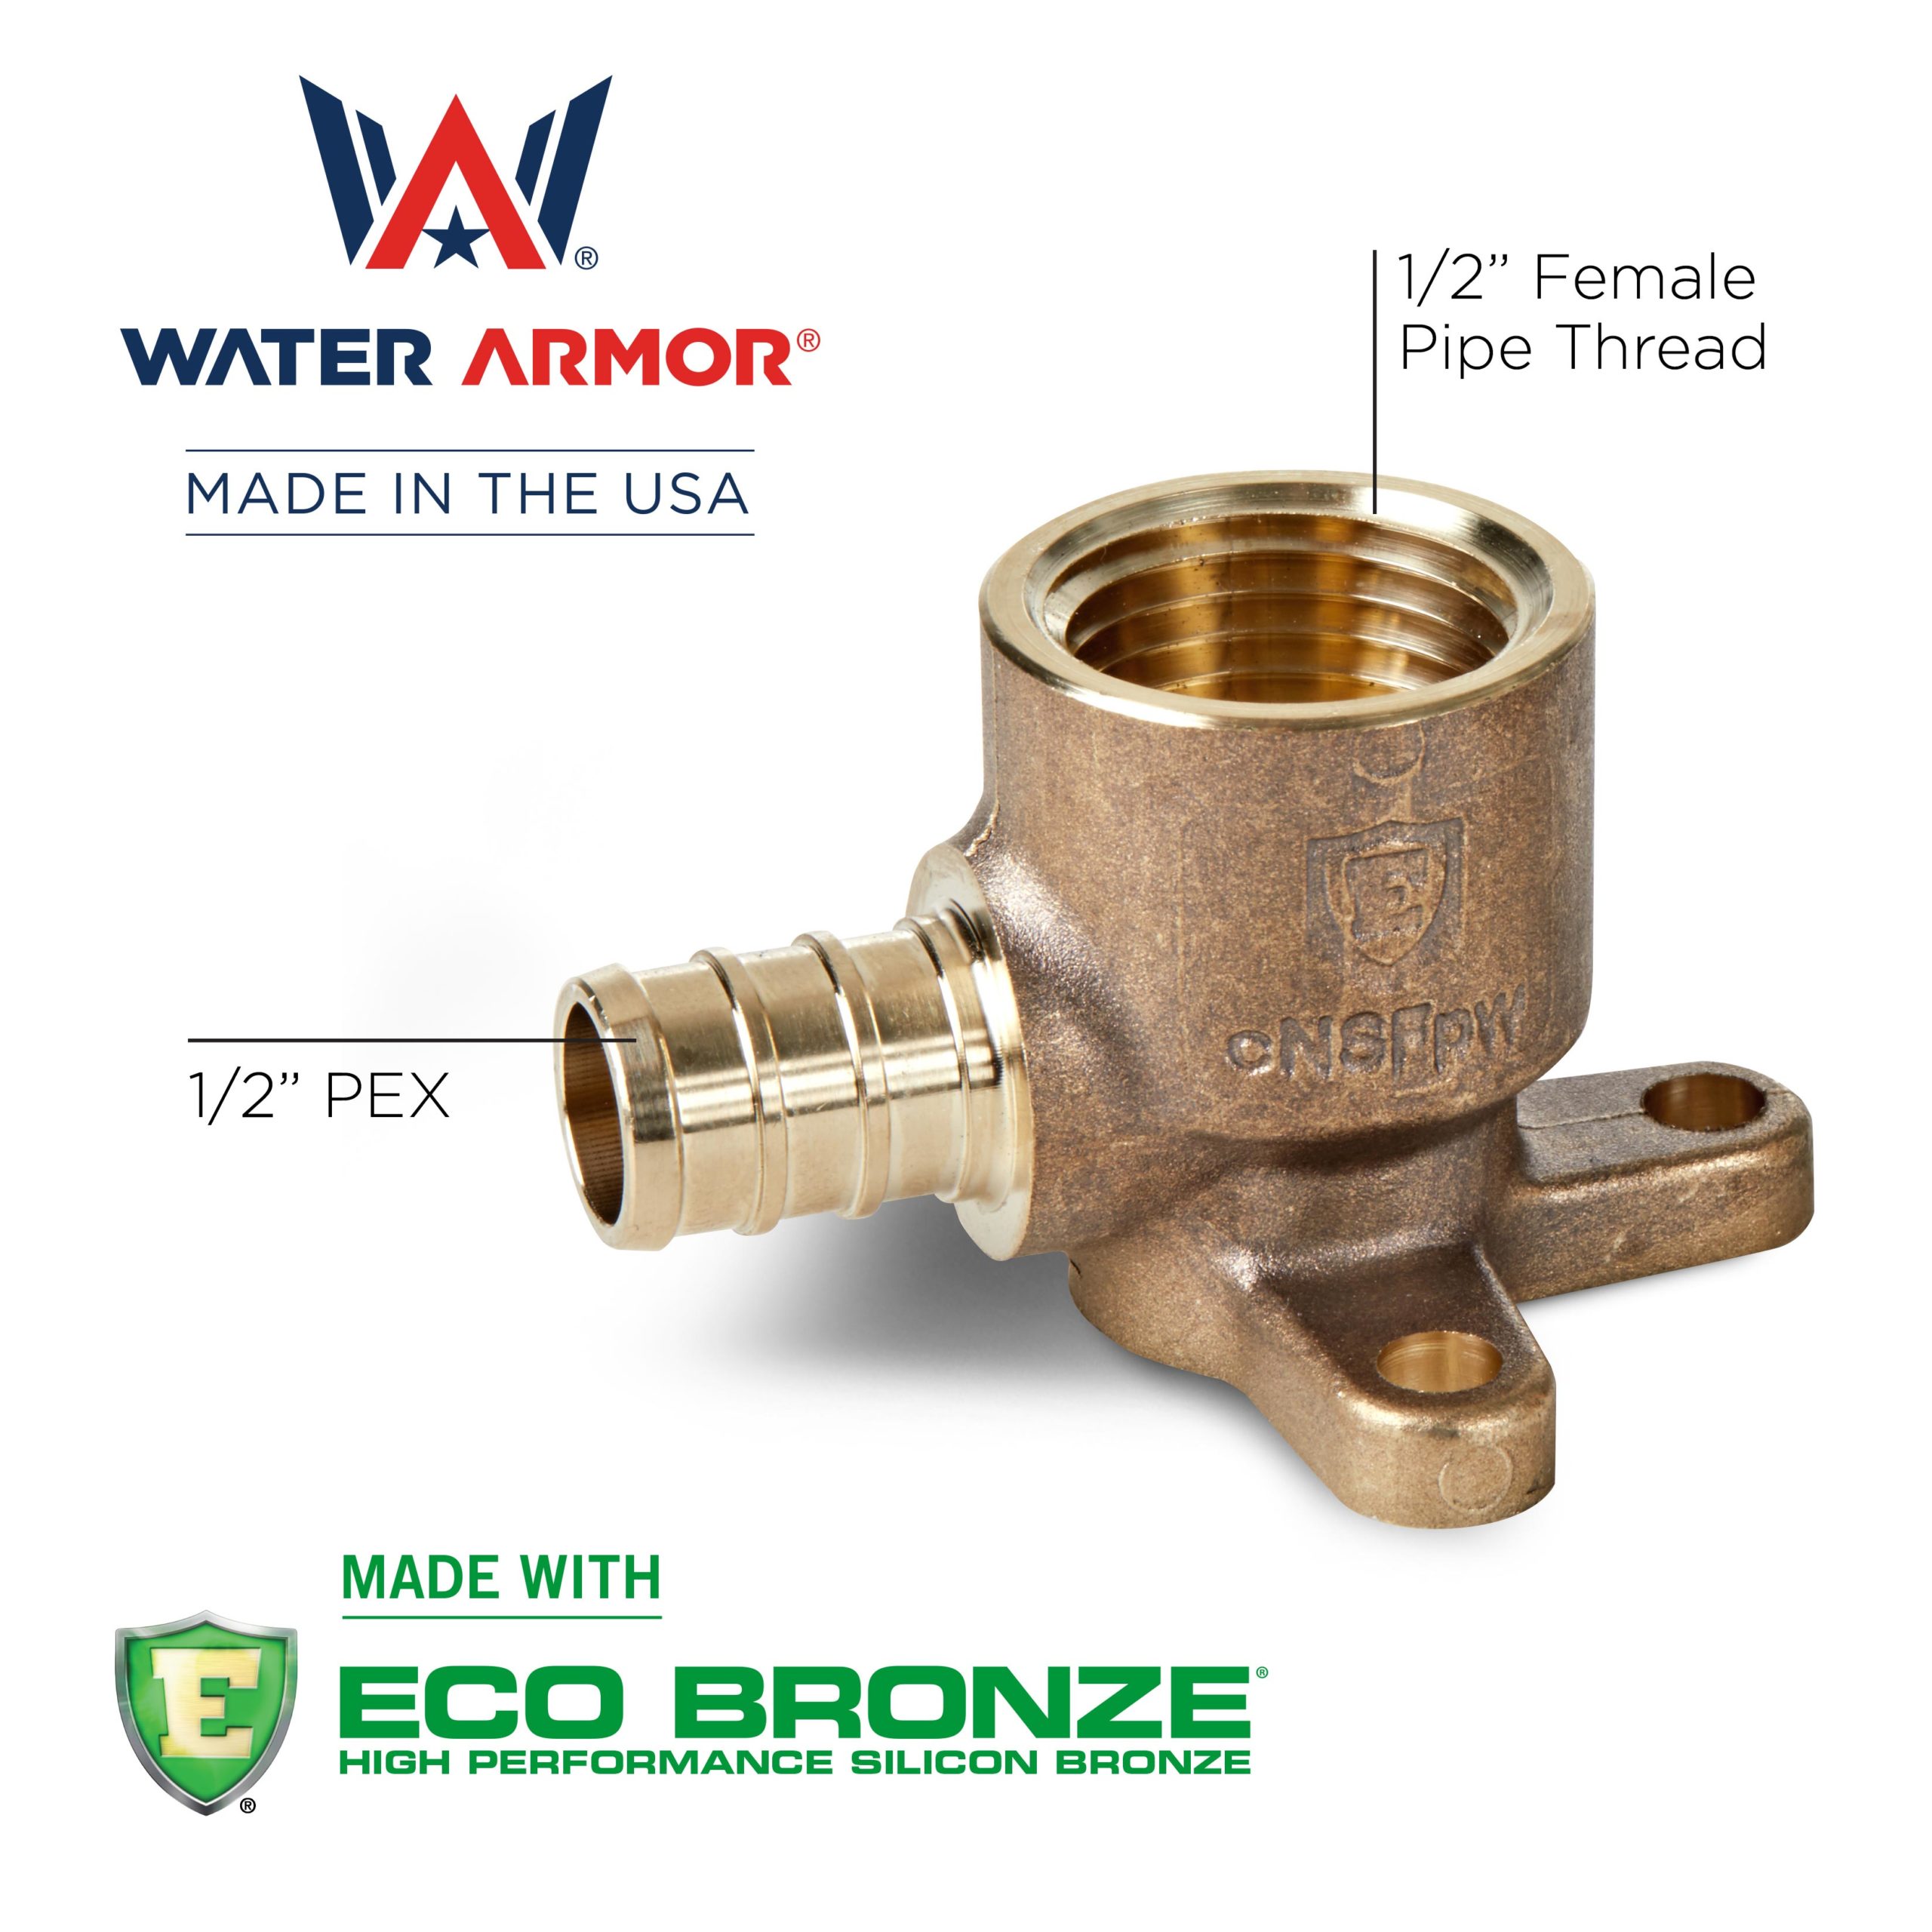 1/2" x 1/2" PEX Drop Ear Water Armor made with ECO Bronze